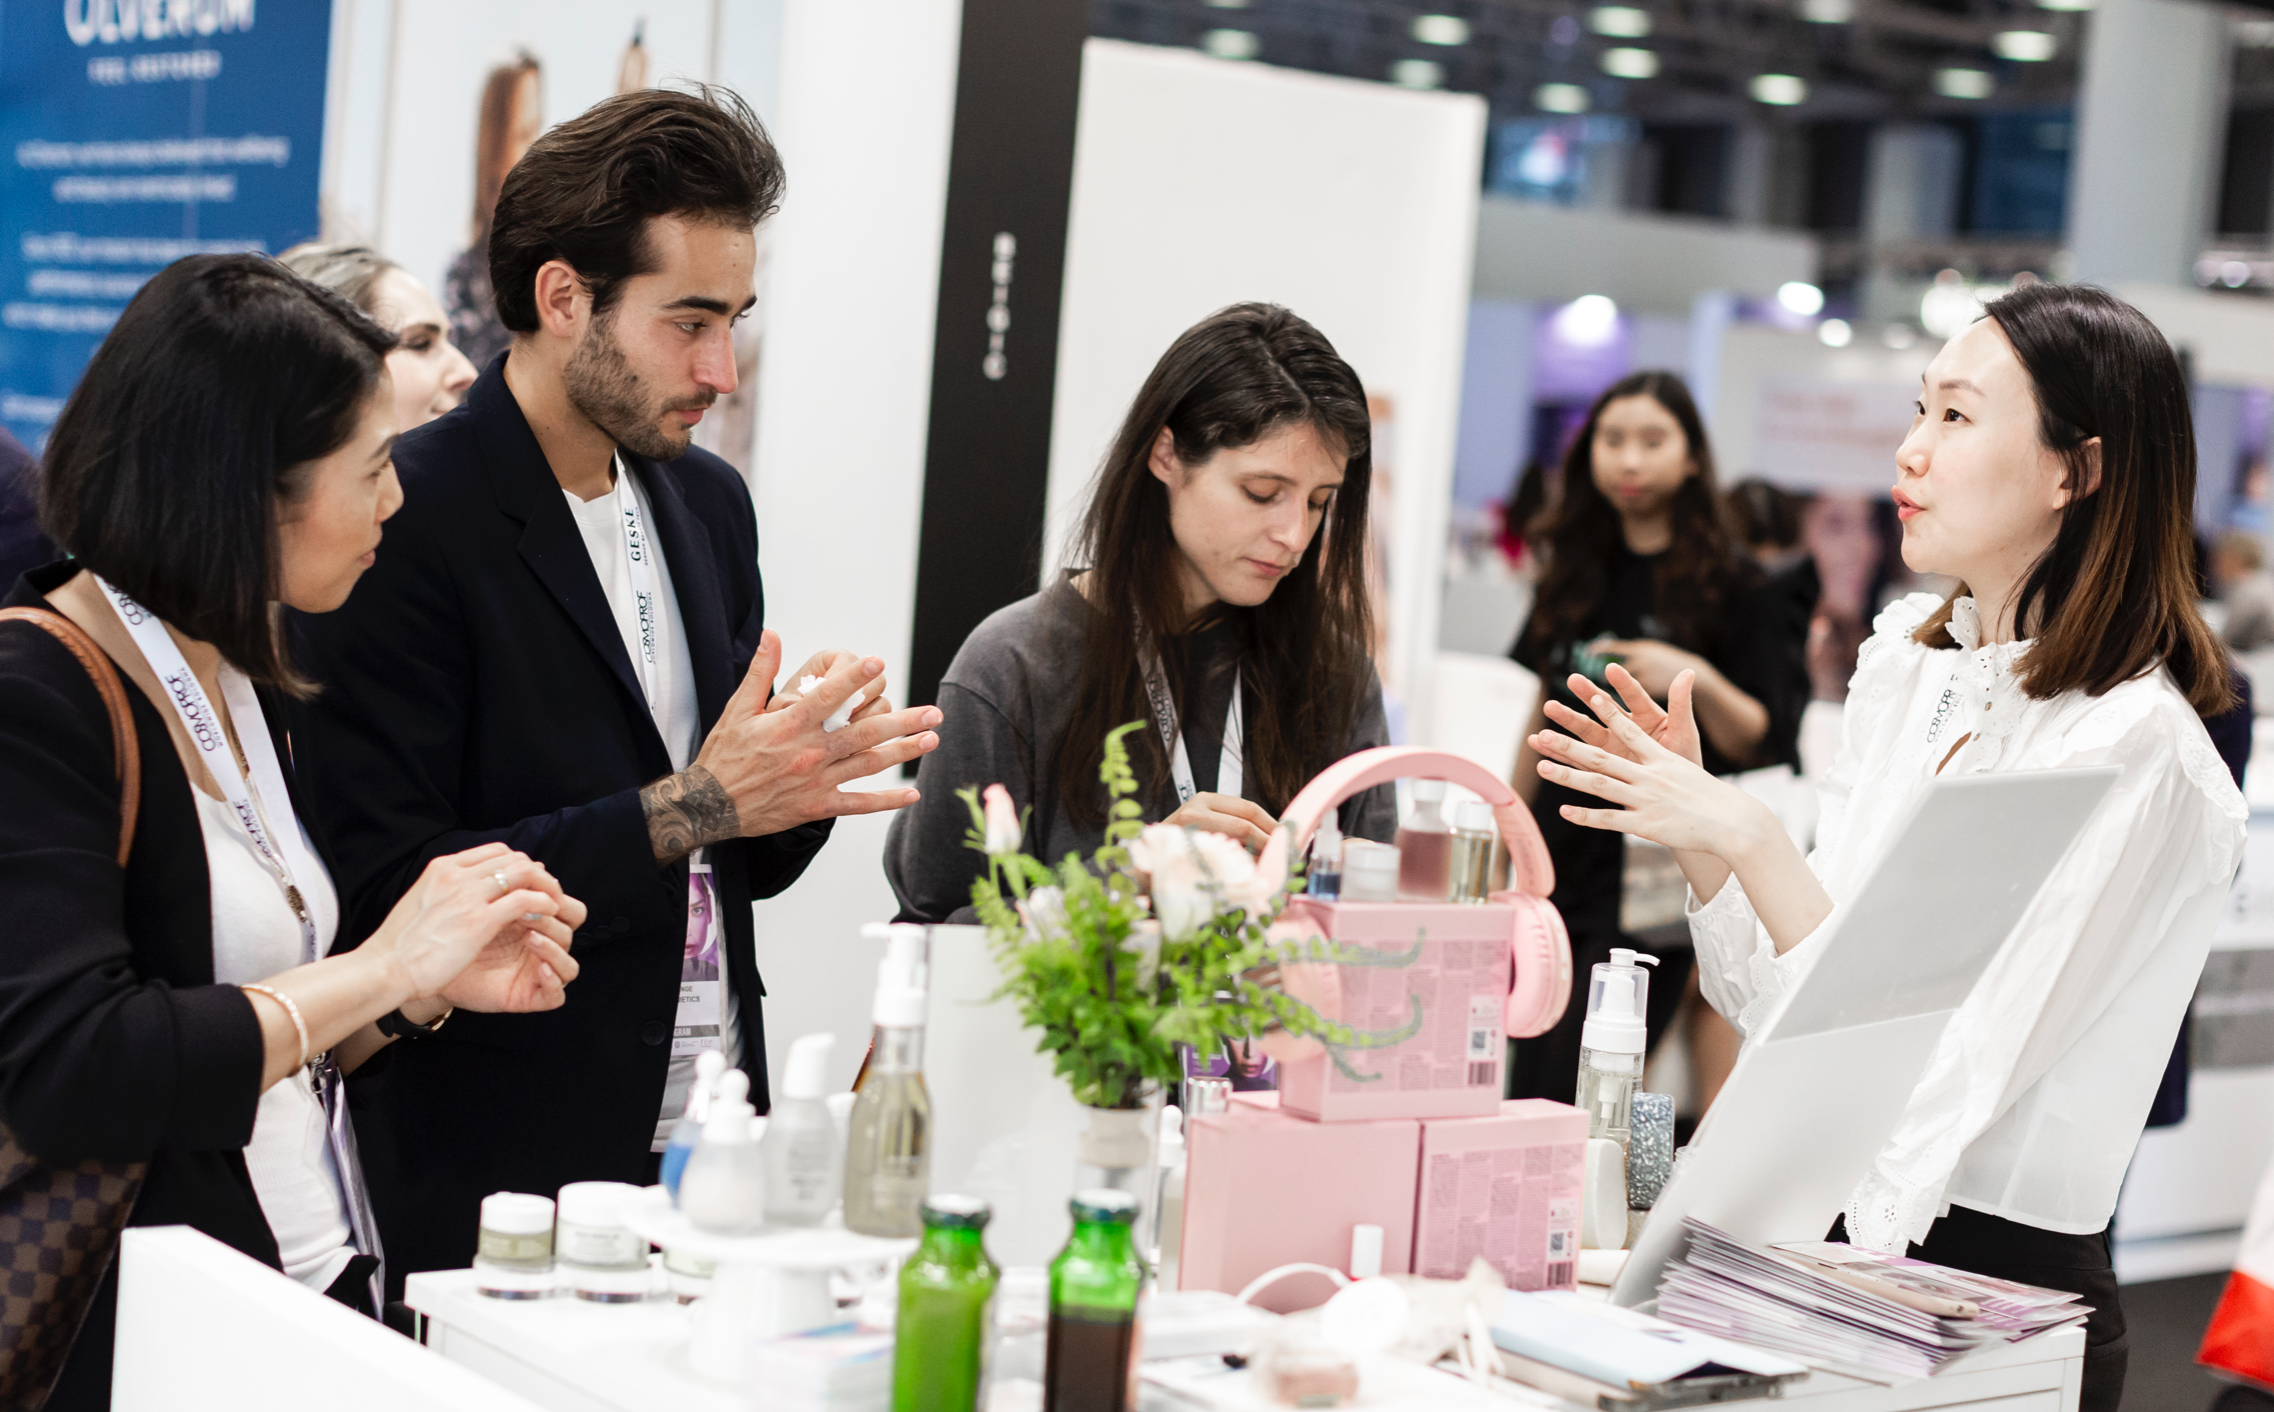 Bologna hosted one of the world’s largest beauty trade shows, Cosmoprof, from March 21 to 24. Photo: Cosmoprof